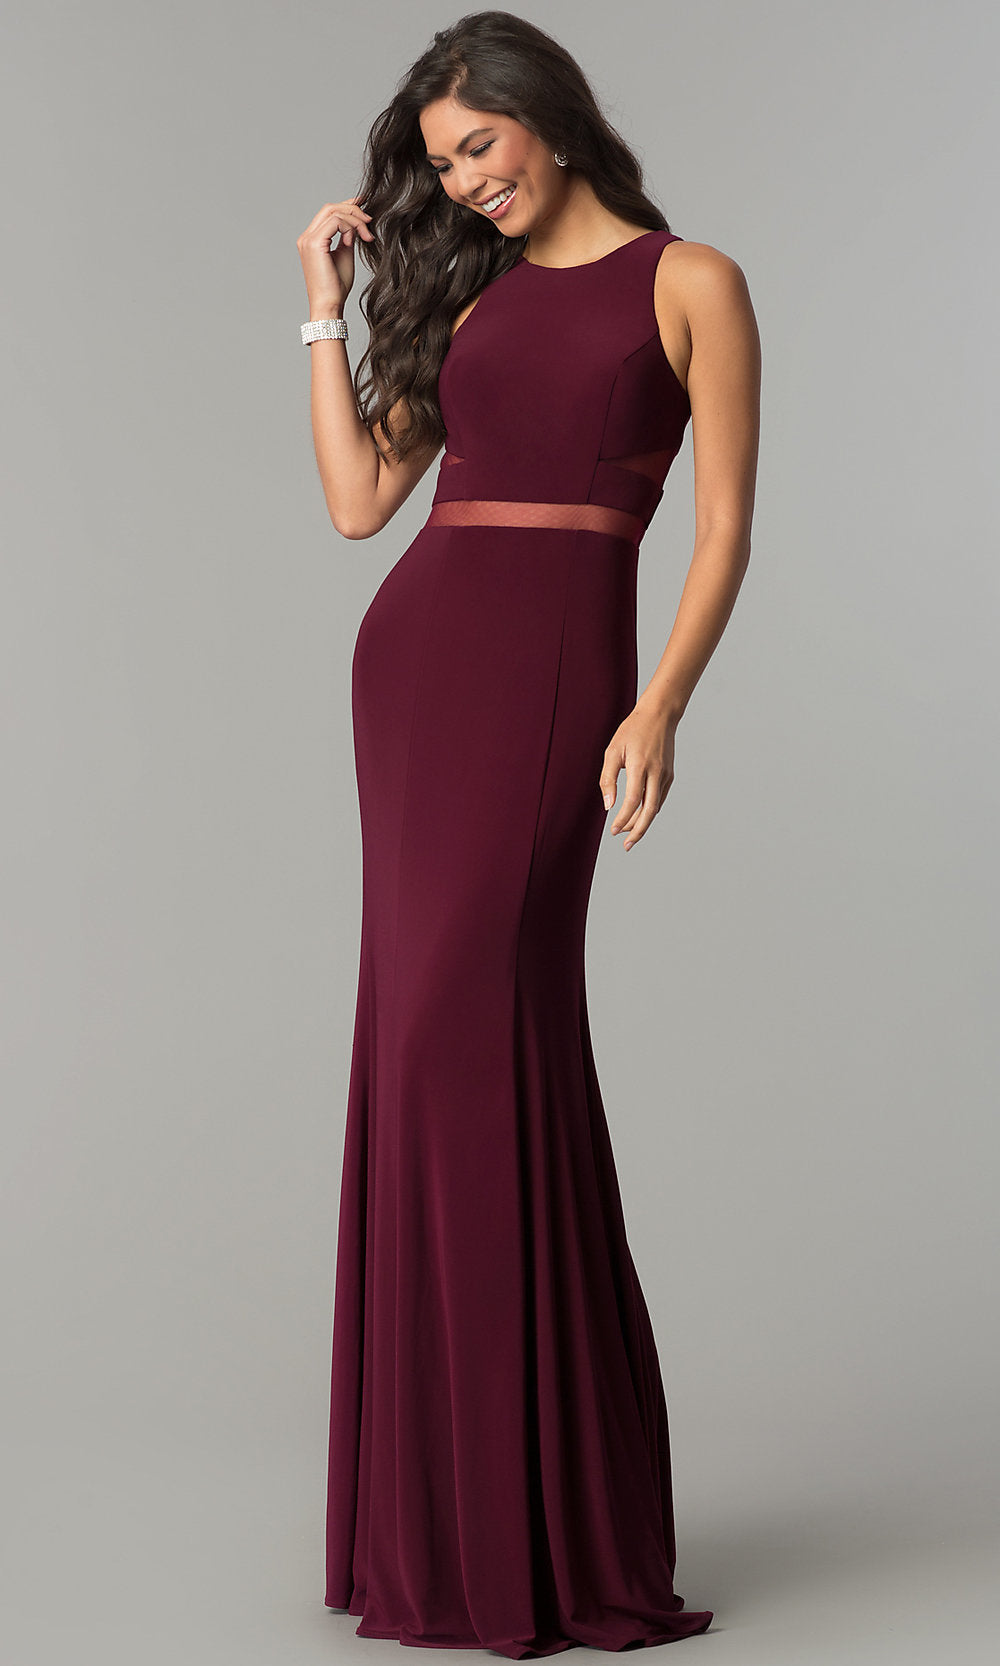 Wine Long Formal Dress with Sheer-Illusion Insets